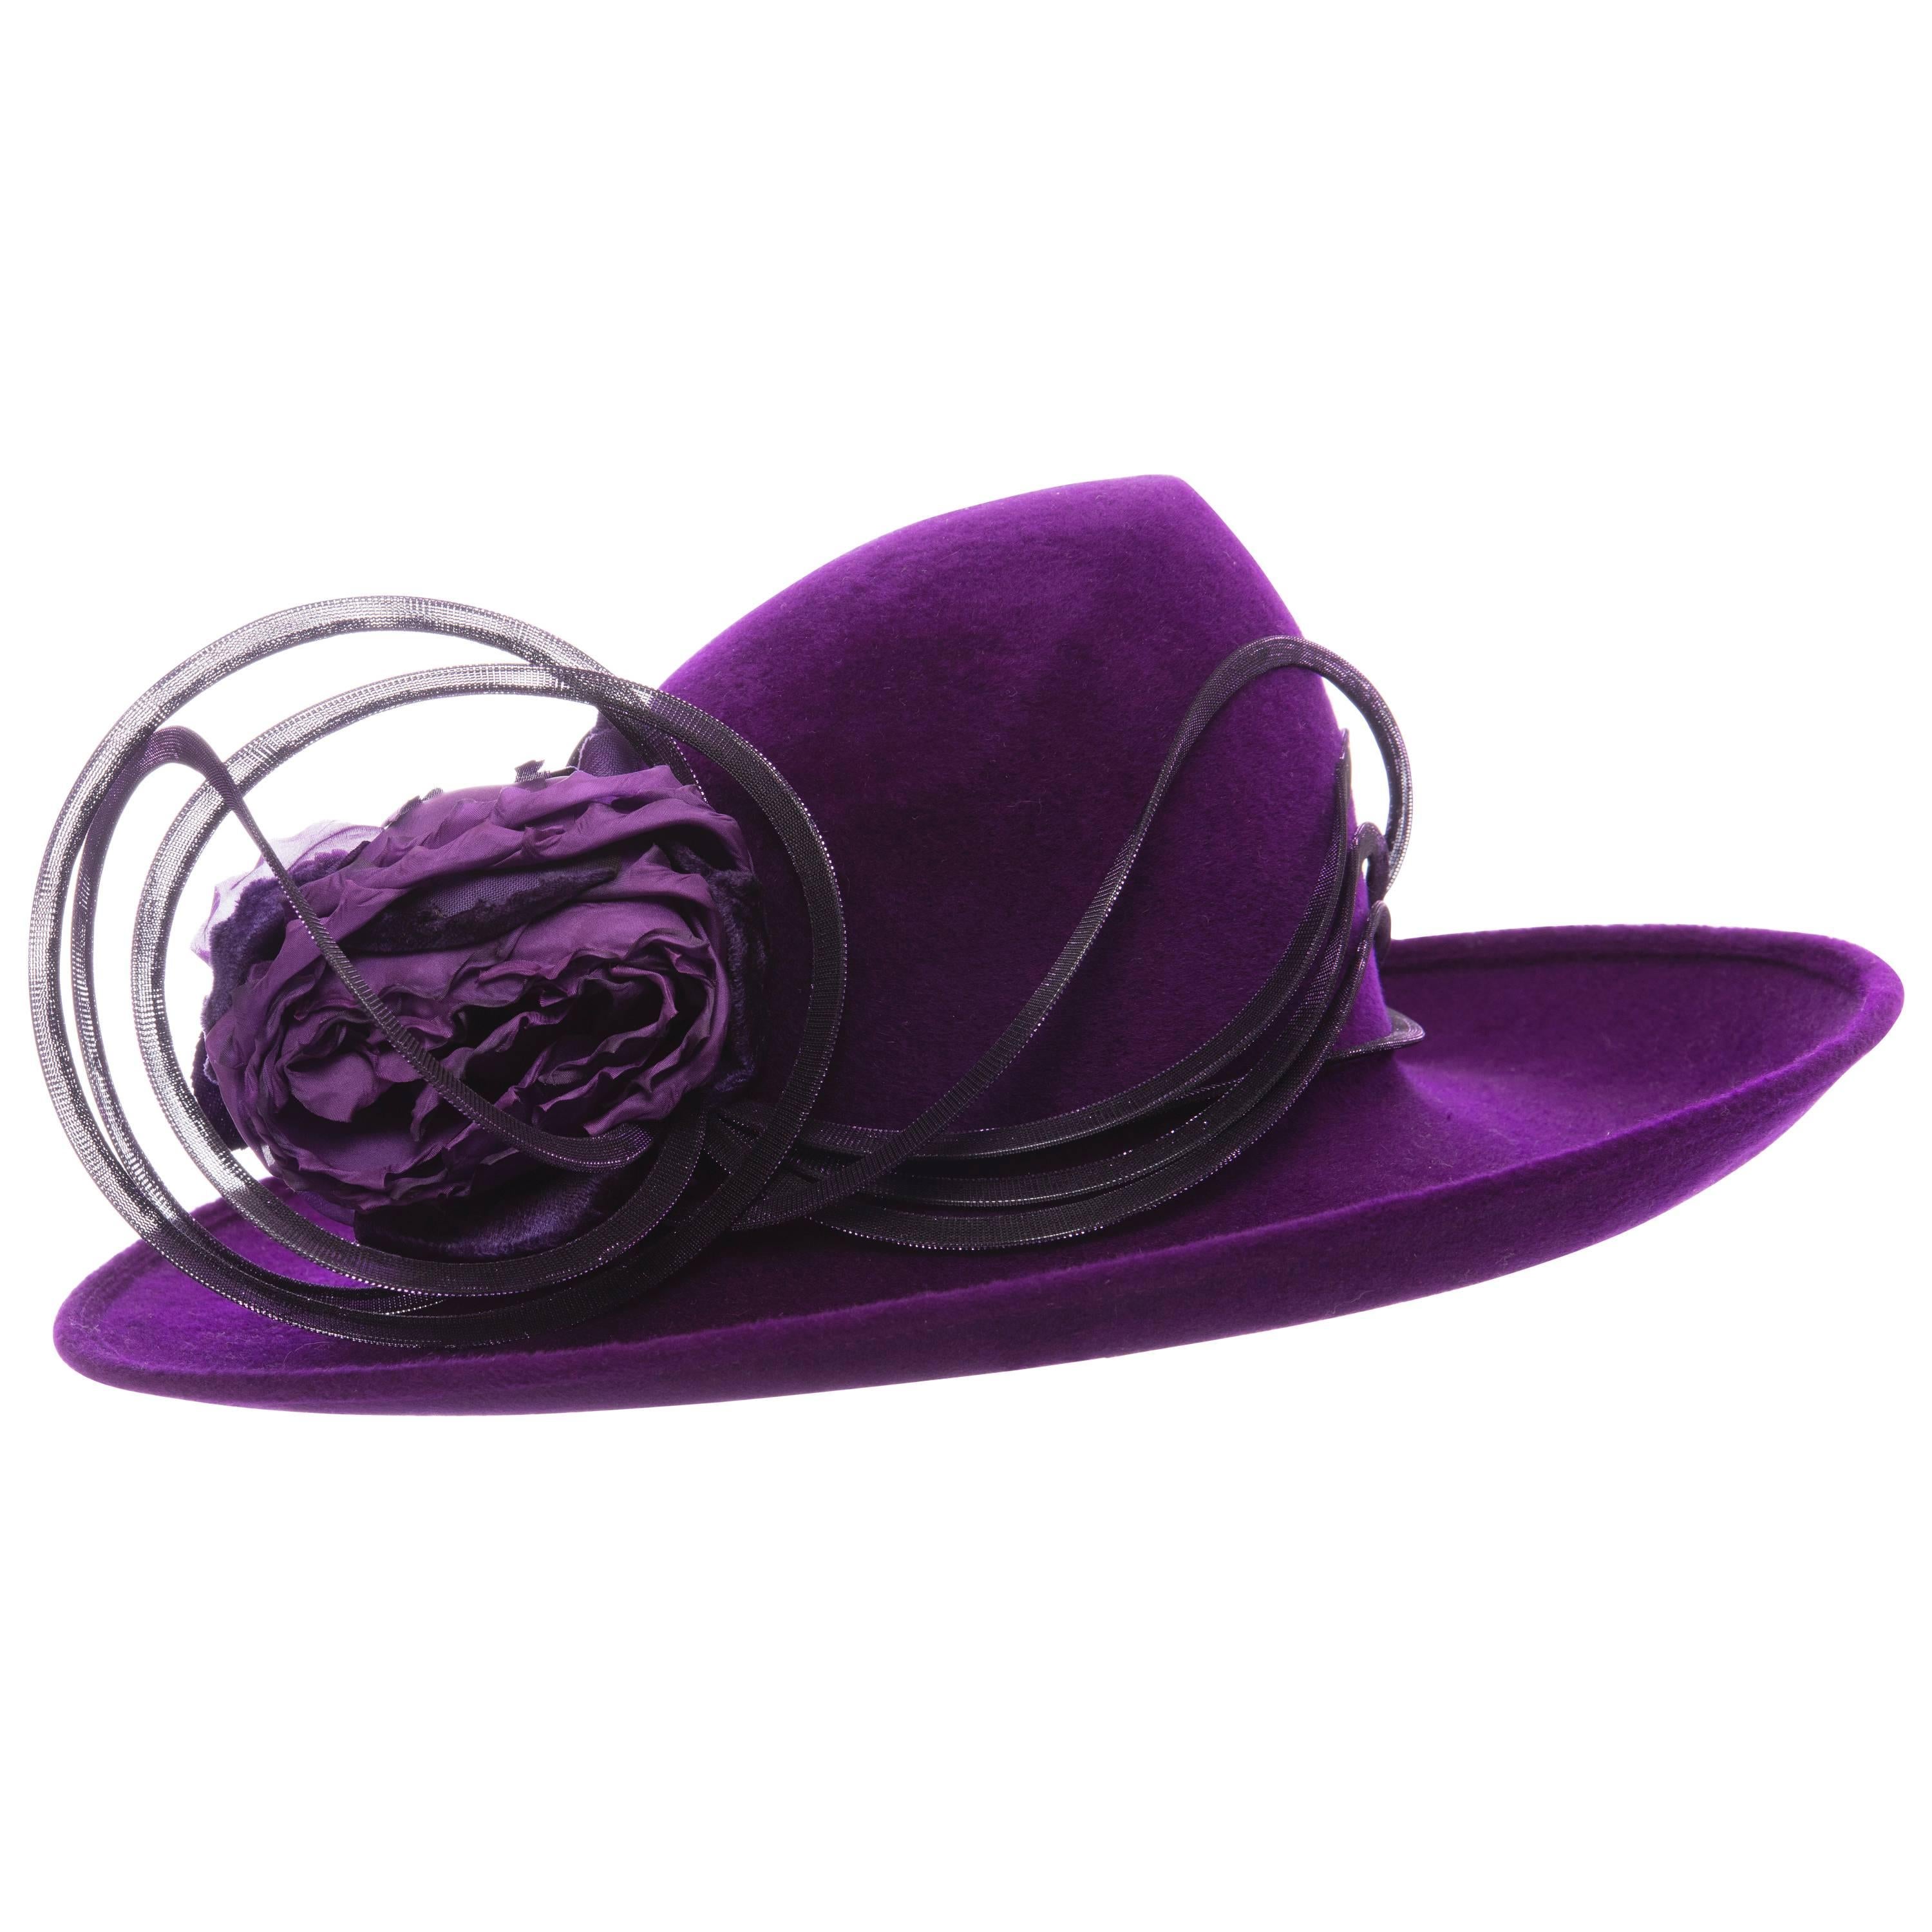 Philip Treacy Wool Hat With Mesh Metallic Accents